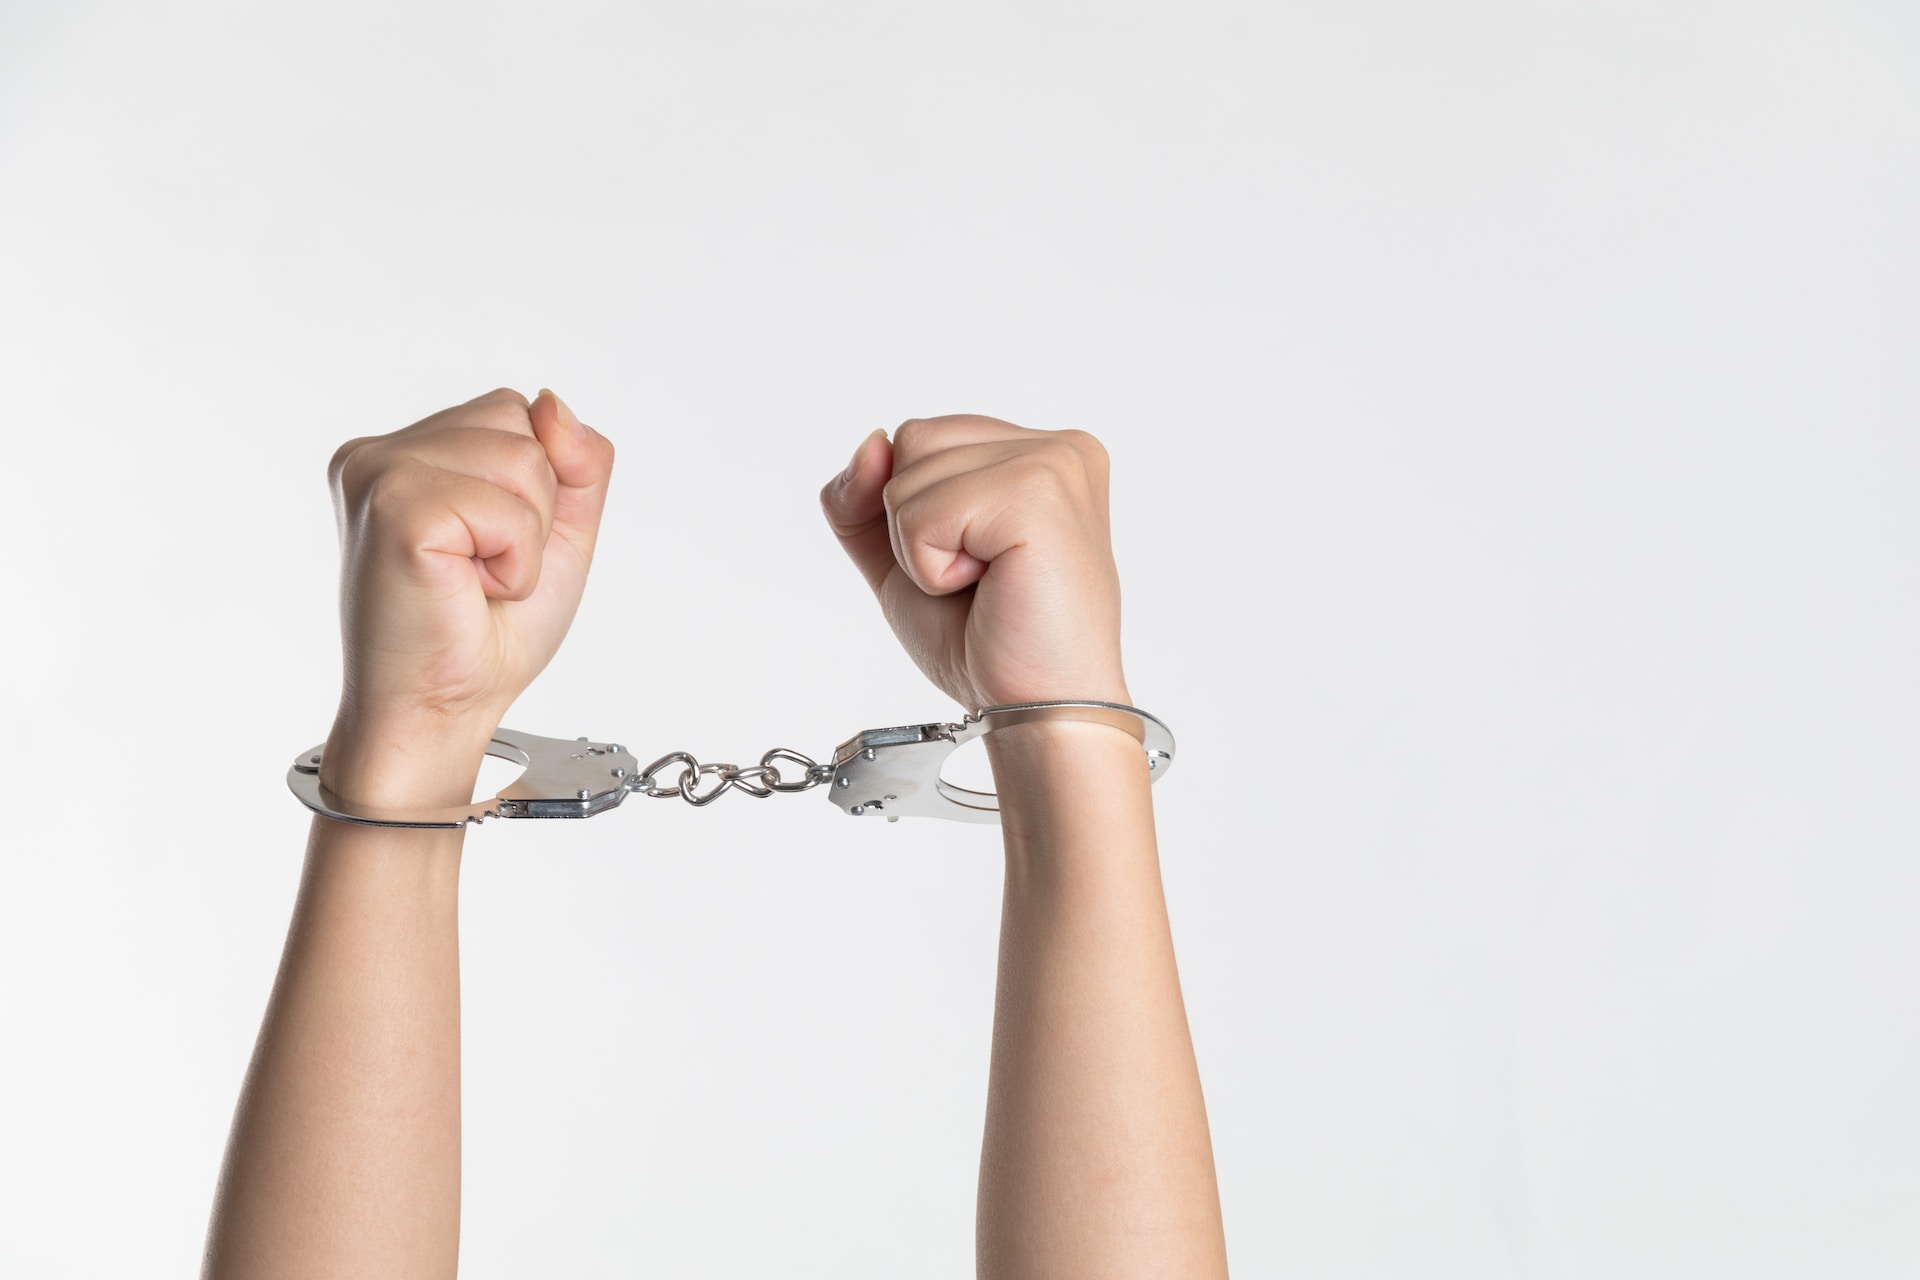 How to Protect Yourself Legally When Facing a Criminal Charge